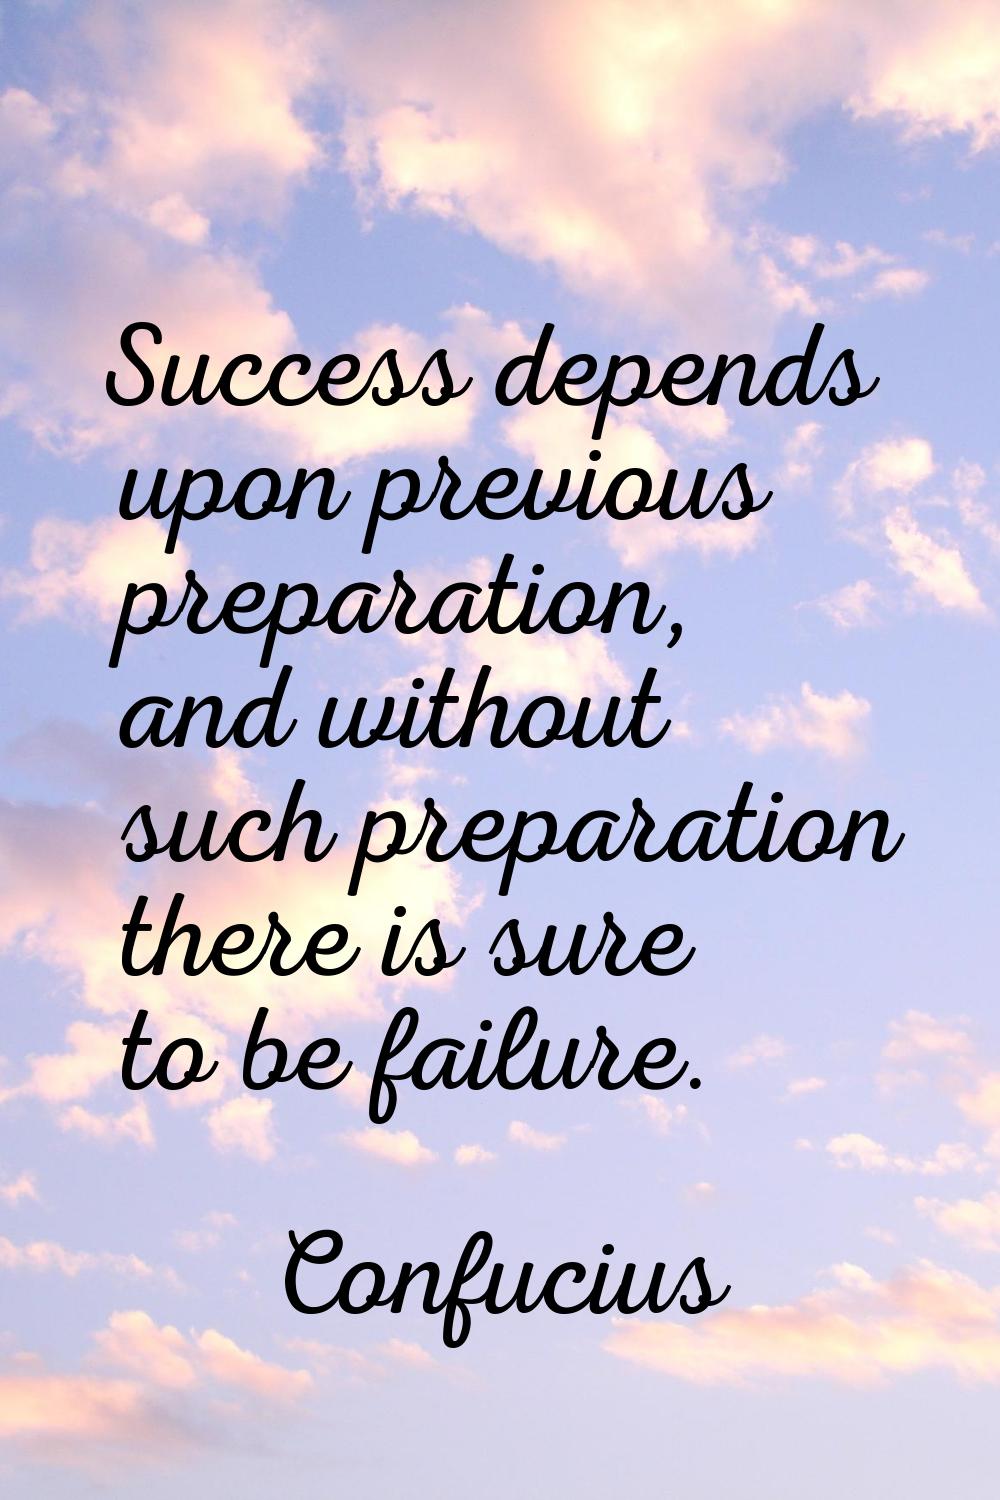 Success depends upon previous preparation, and without such preparation there is sure to be failure